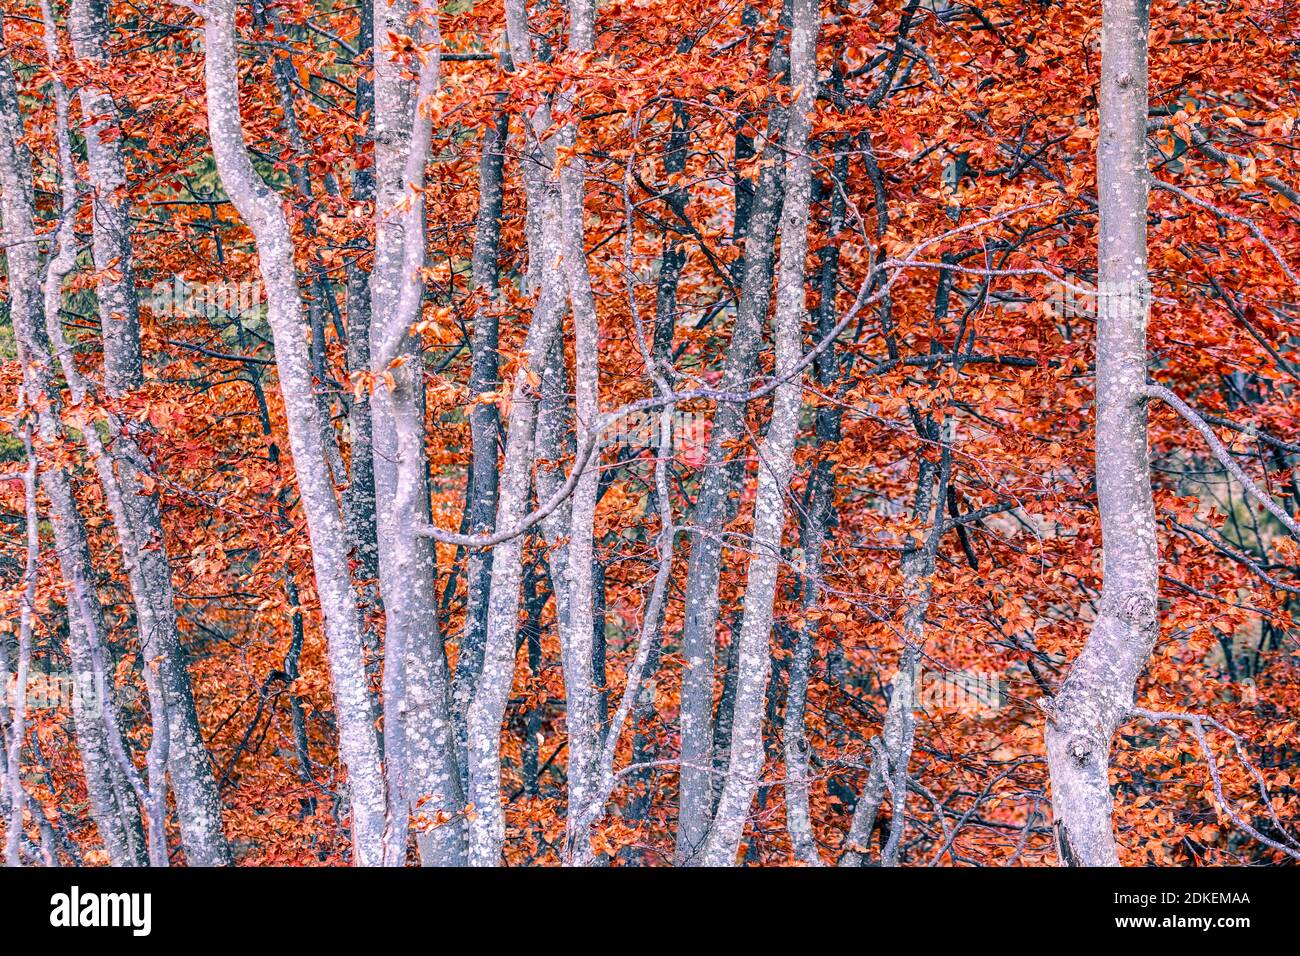 detail on the branches of beech trees in autumnal dress, dry red leaves, autumn in valle del maè, zoldo, dolomites, province of belluno, veneto, italy Stock Photo